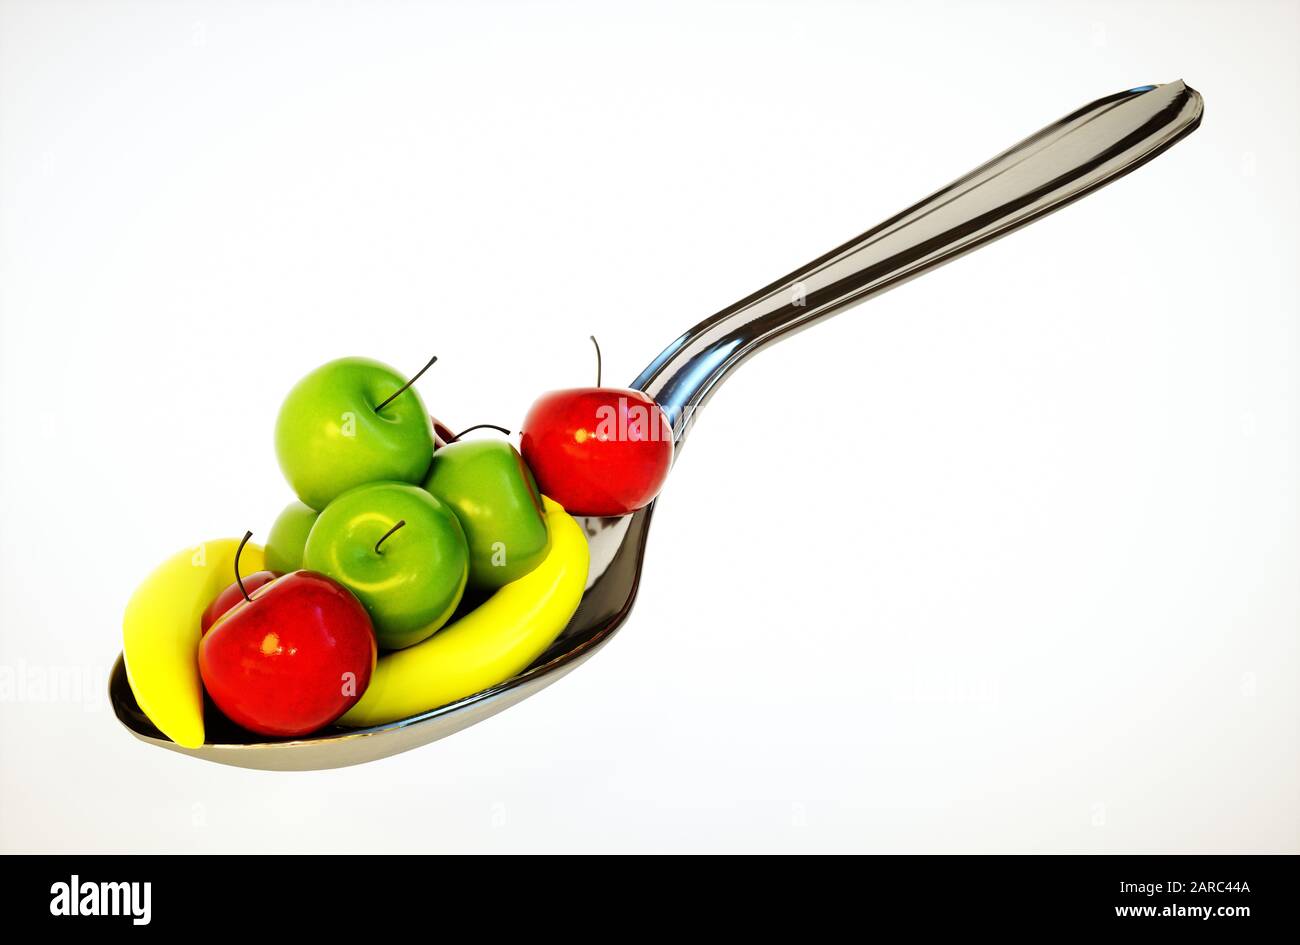 3d render image of spoon with fruit Stock Photo